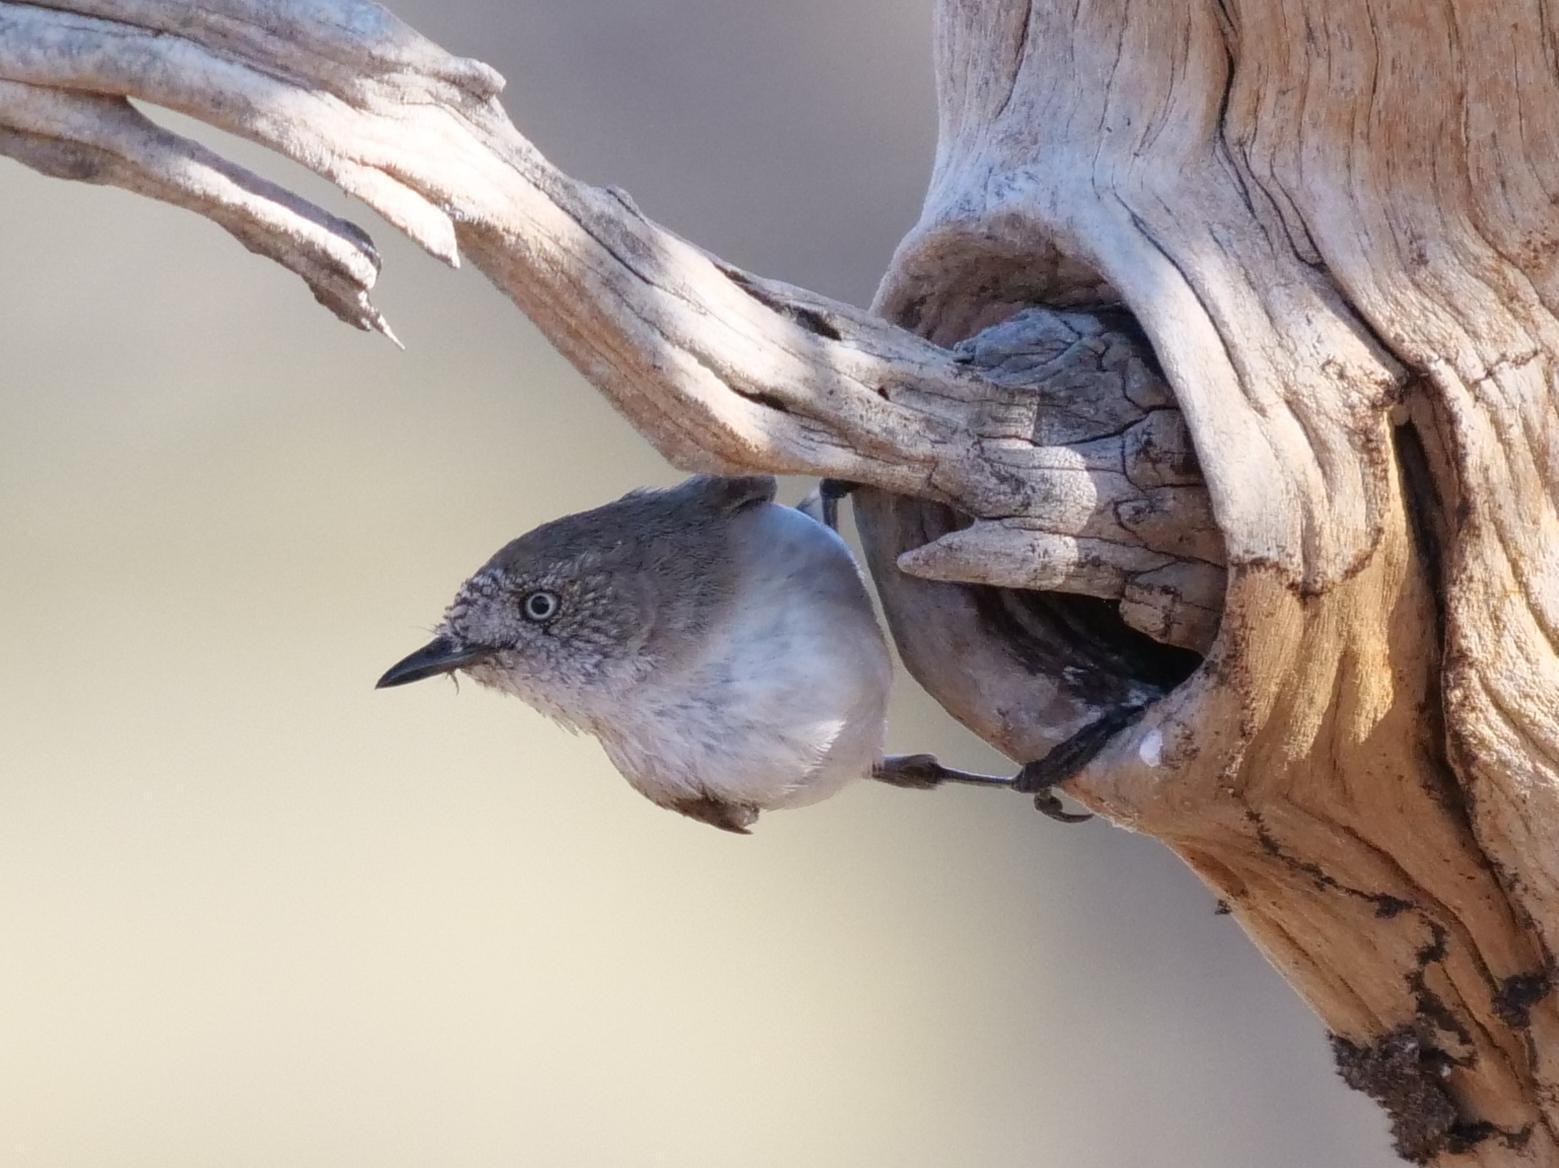 Chestnut-rumped Thornbill Photo by Peter Lowe